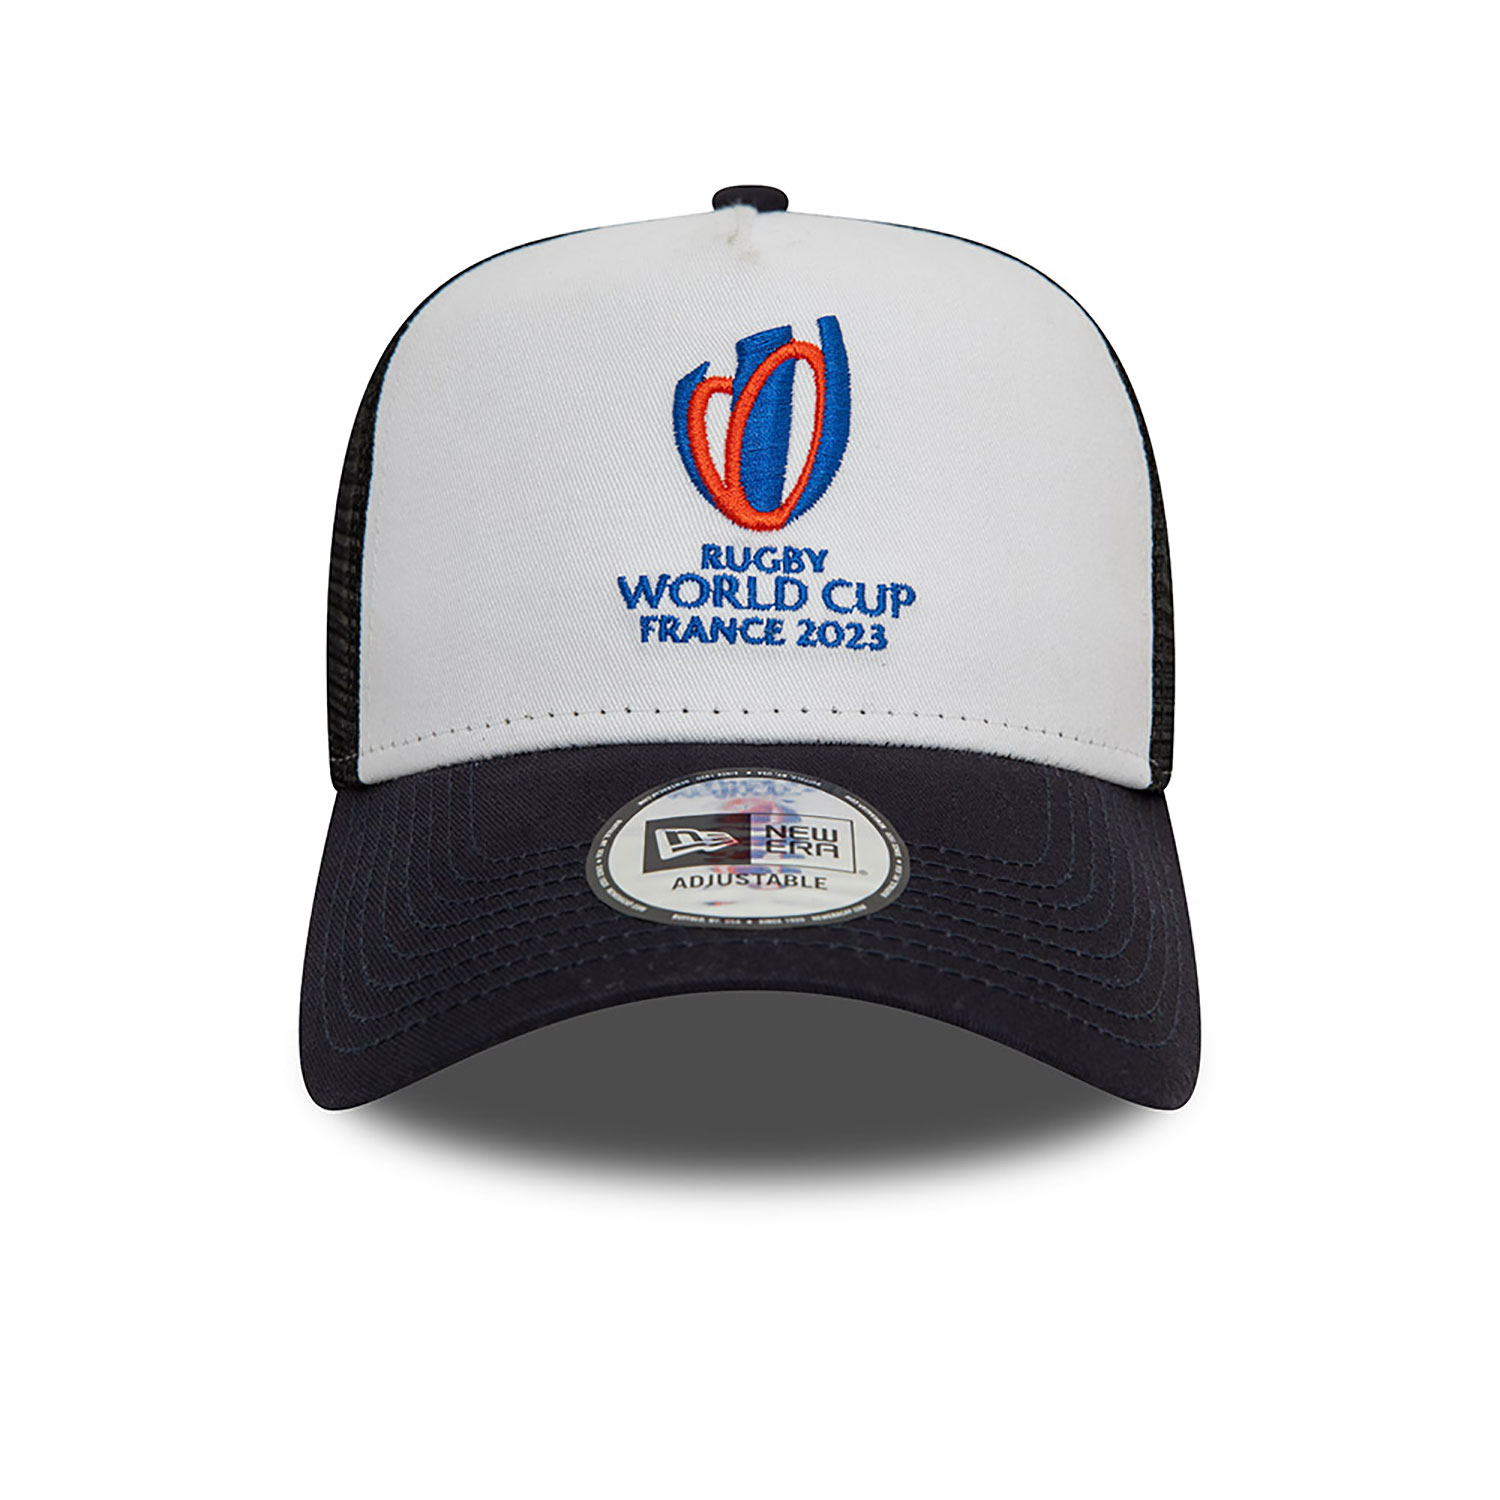 Rugby World Cup 2023 Black A-Frame Trucker Cap